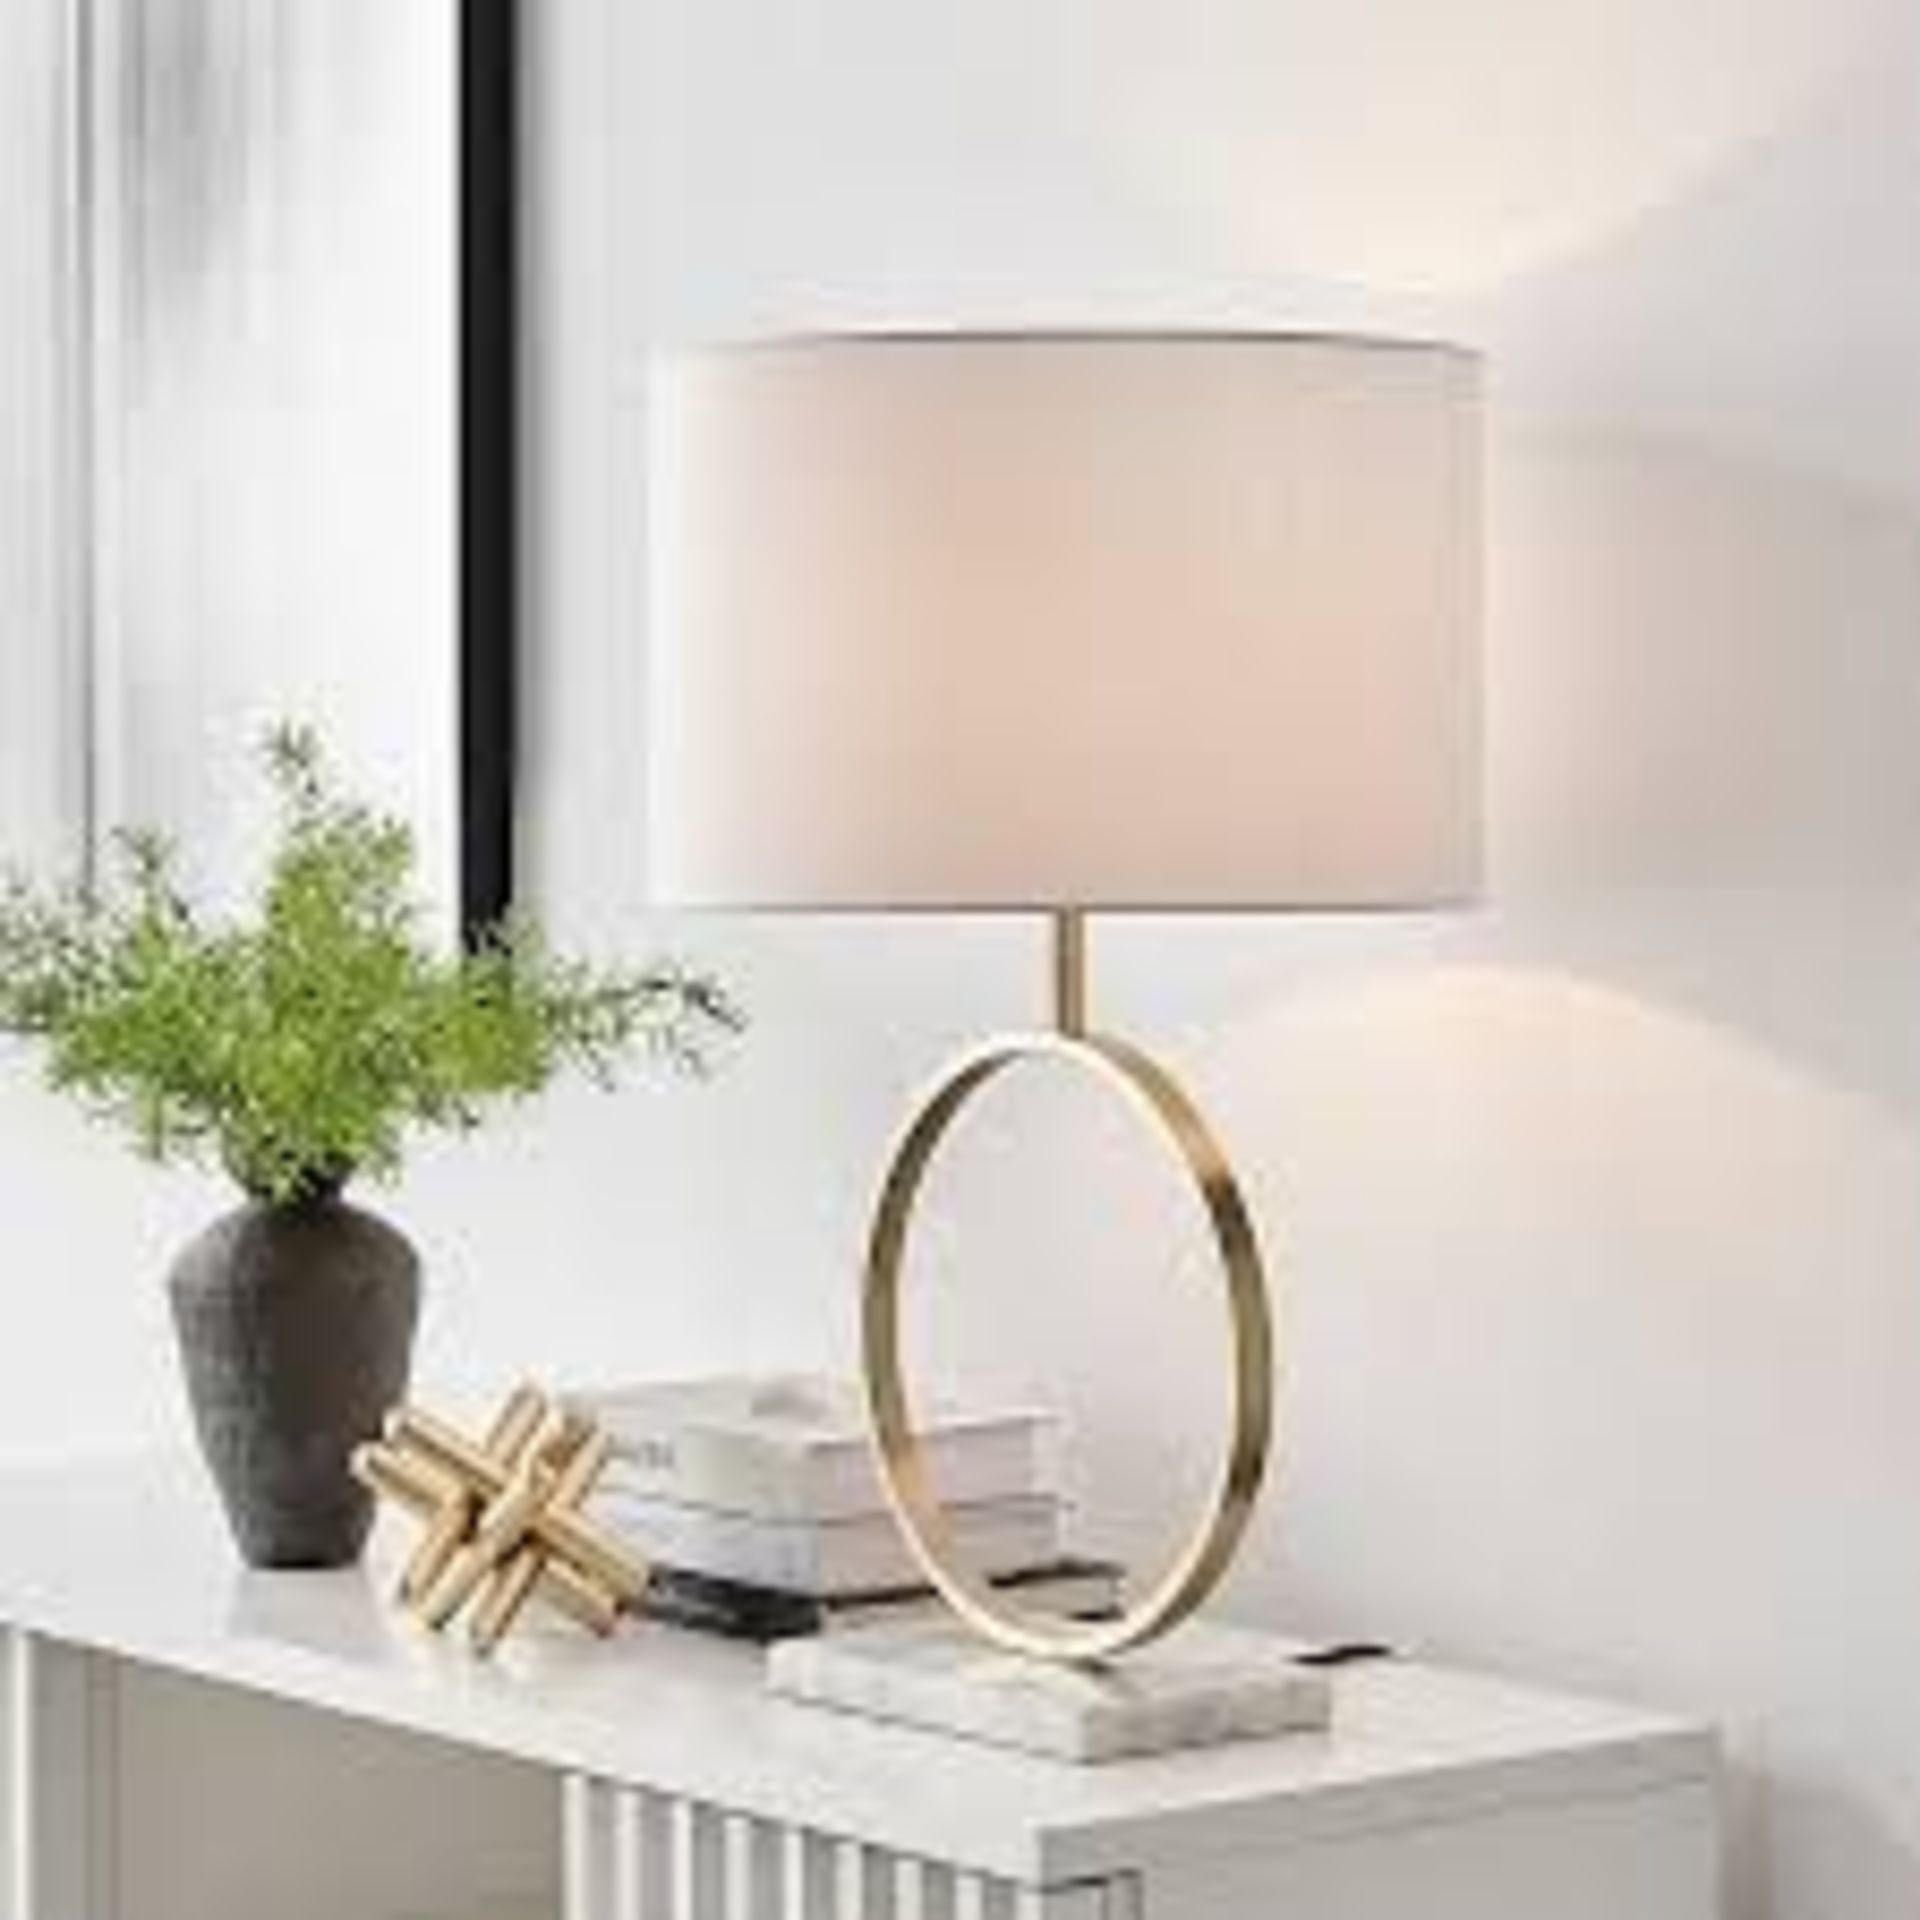 SAFFRON Gold Chrome Halo Table Lamp with White Marble Base. -R14.17.